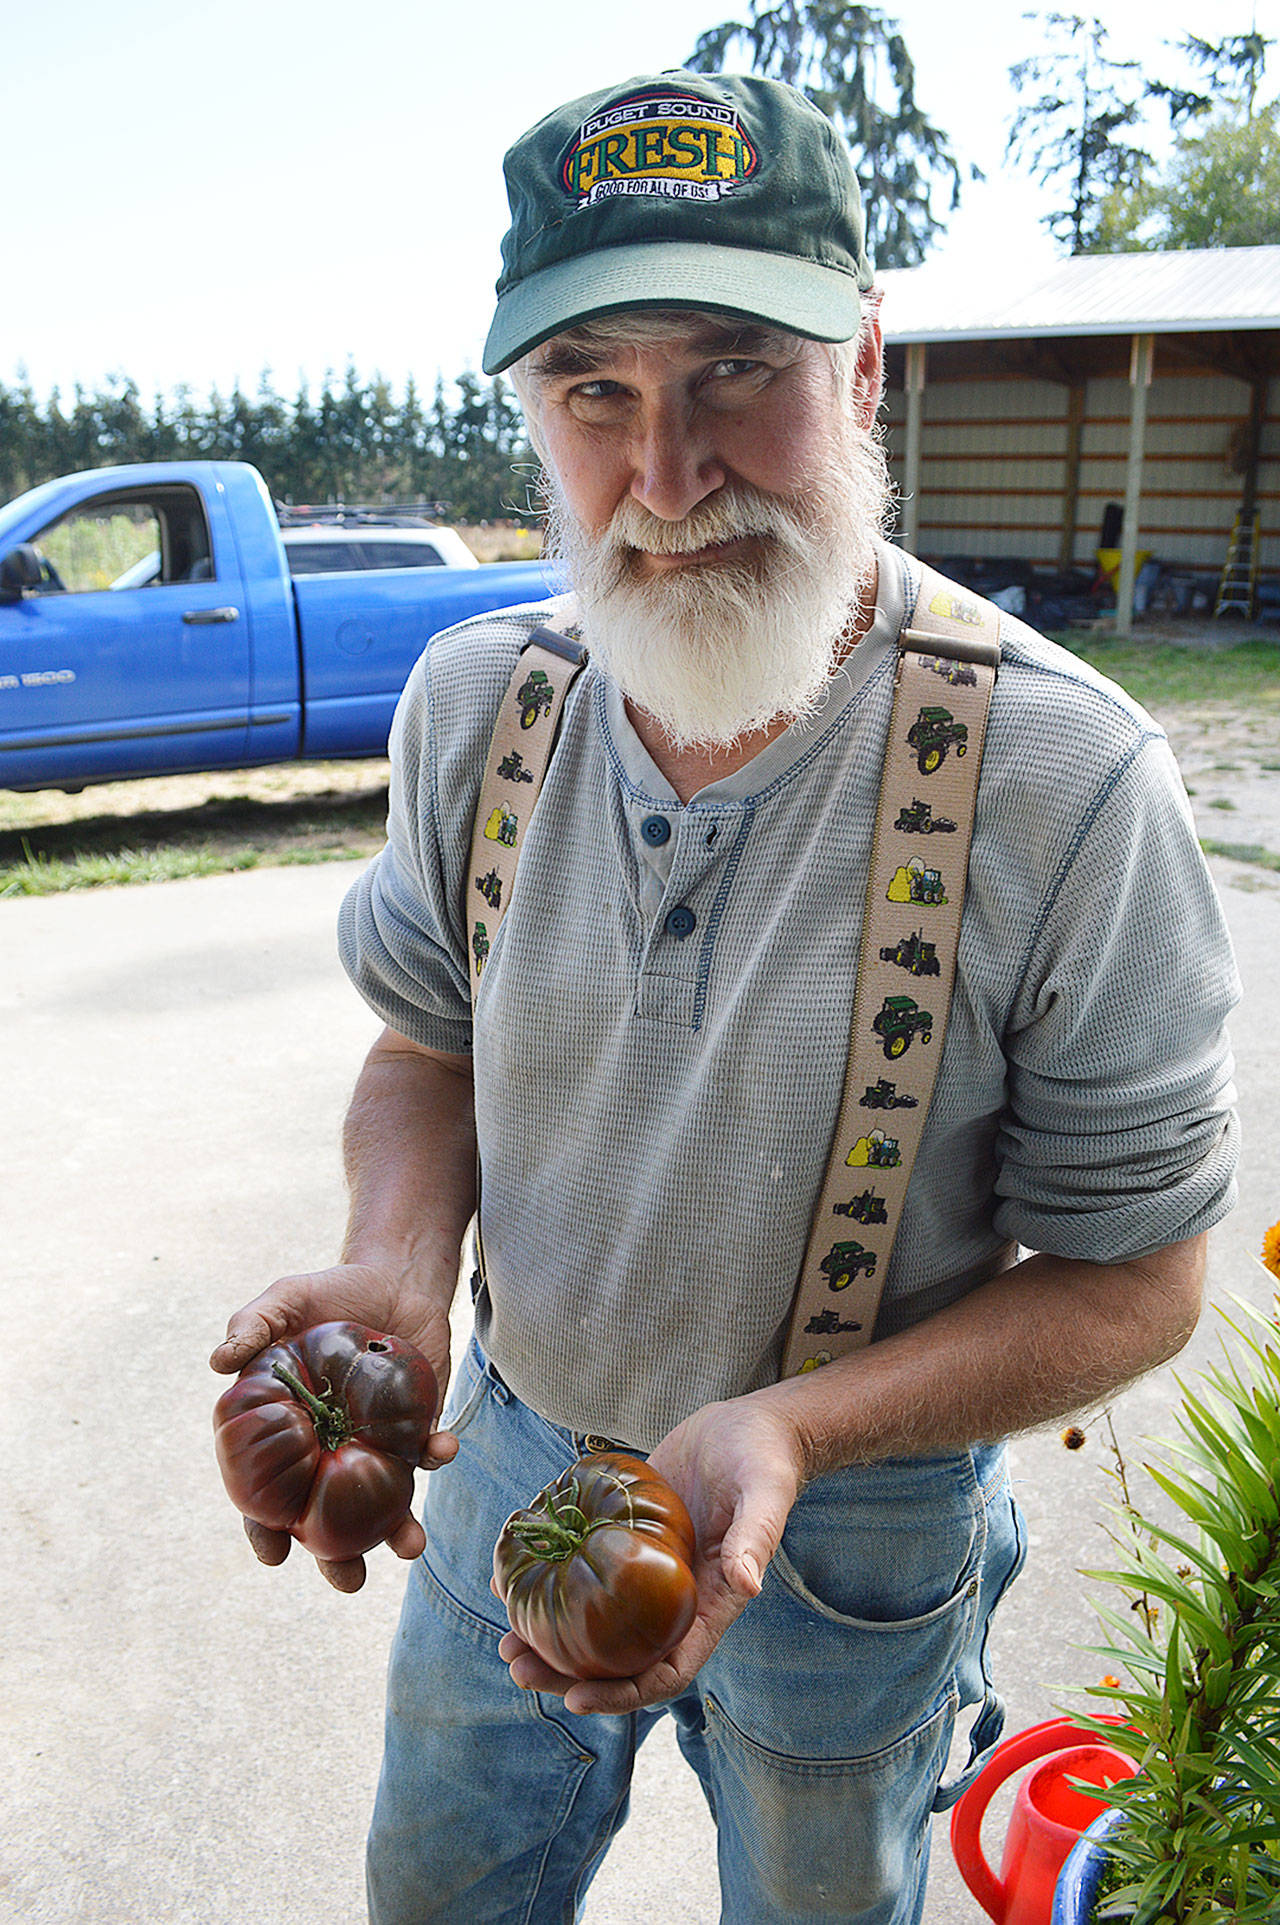 John Burks, owner of Kettle’s Edge Farm, holds a couple heirloom tomatoes that will be featured in cooking demonstrations by a local food blogger during the Ebey’s Farm Tour from 10 a.m. to 2 p.m., Sept. 29. Photo by Laura Guido/Whidbey News Group